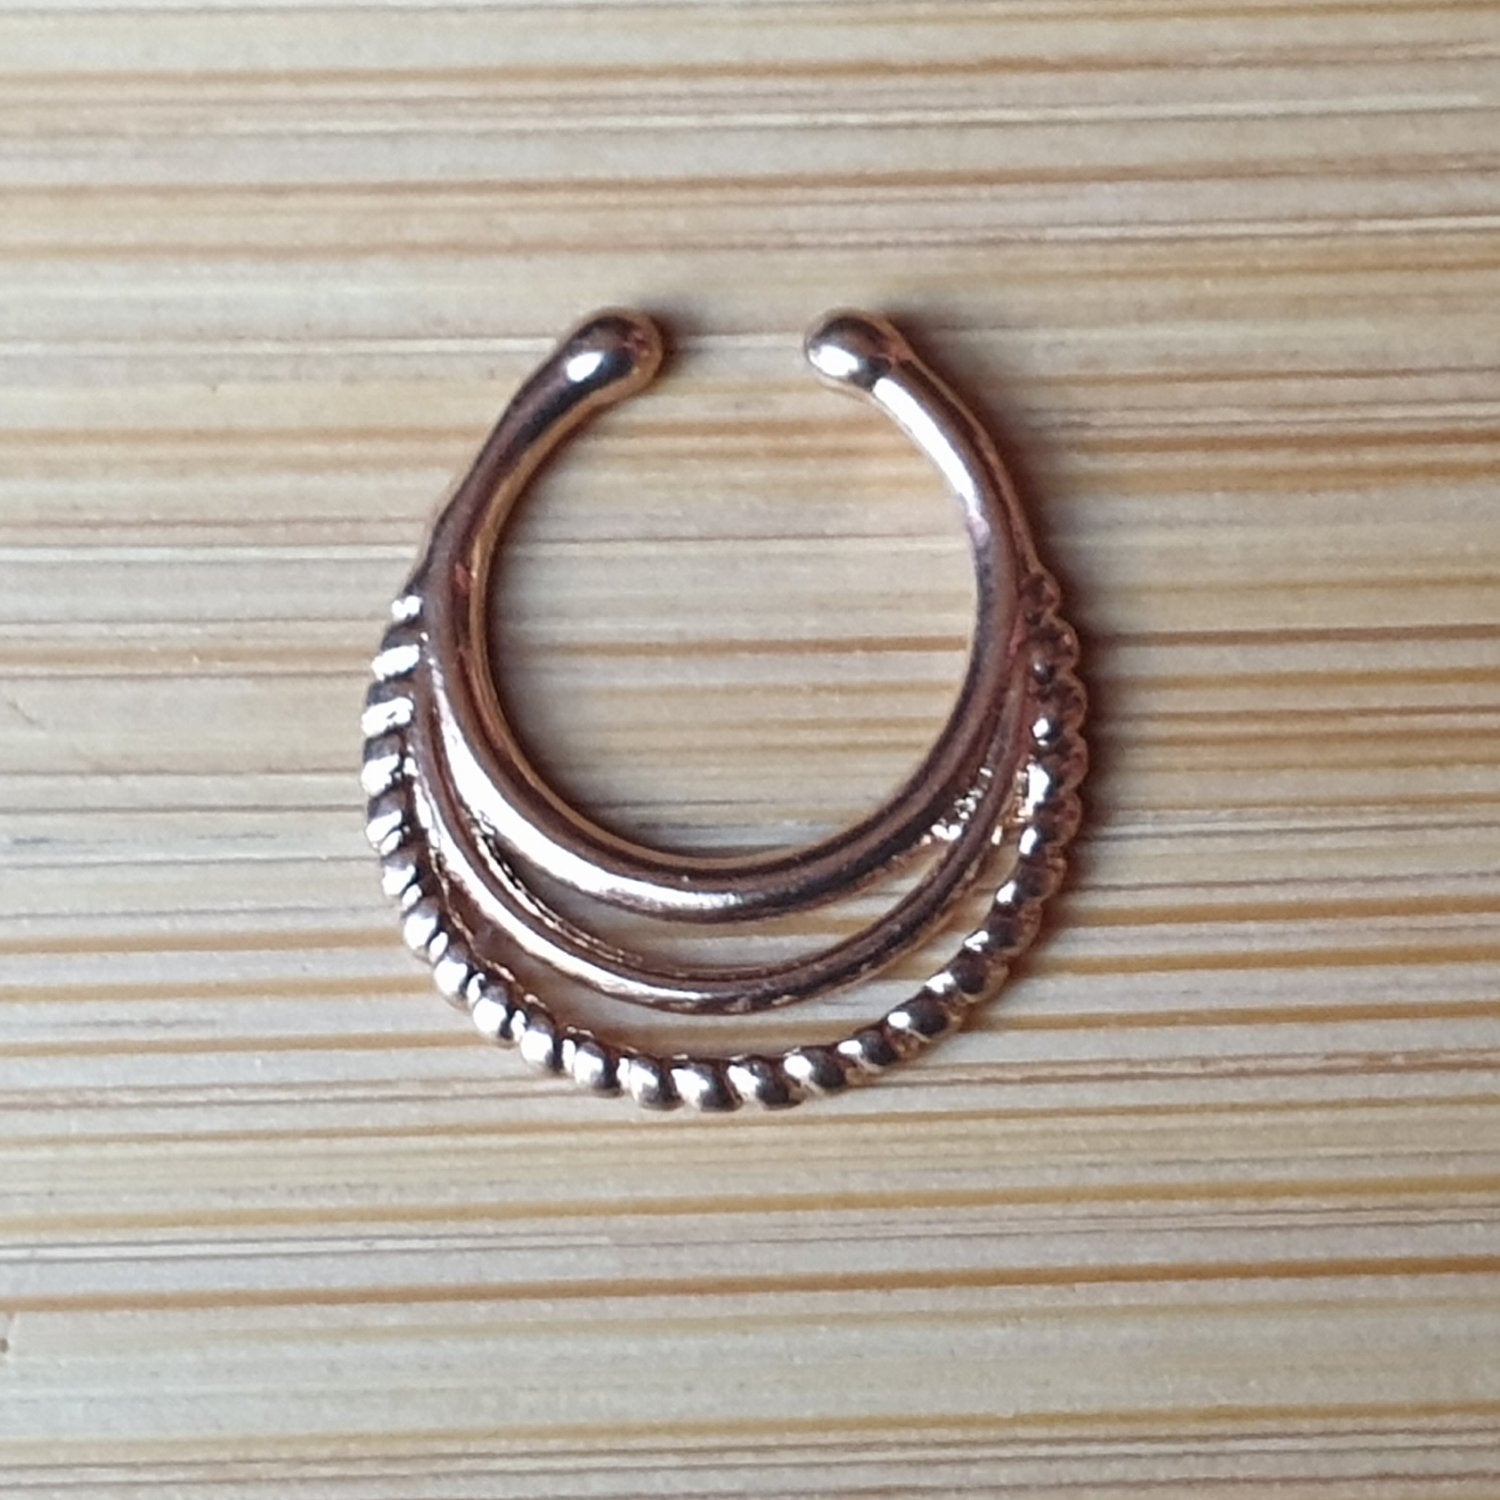 Decorative Septum Clipper - 316L Surgical Steel - Rose Gold Finish - Charming And Trendy Ltd